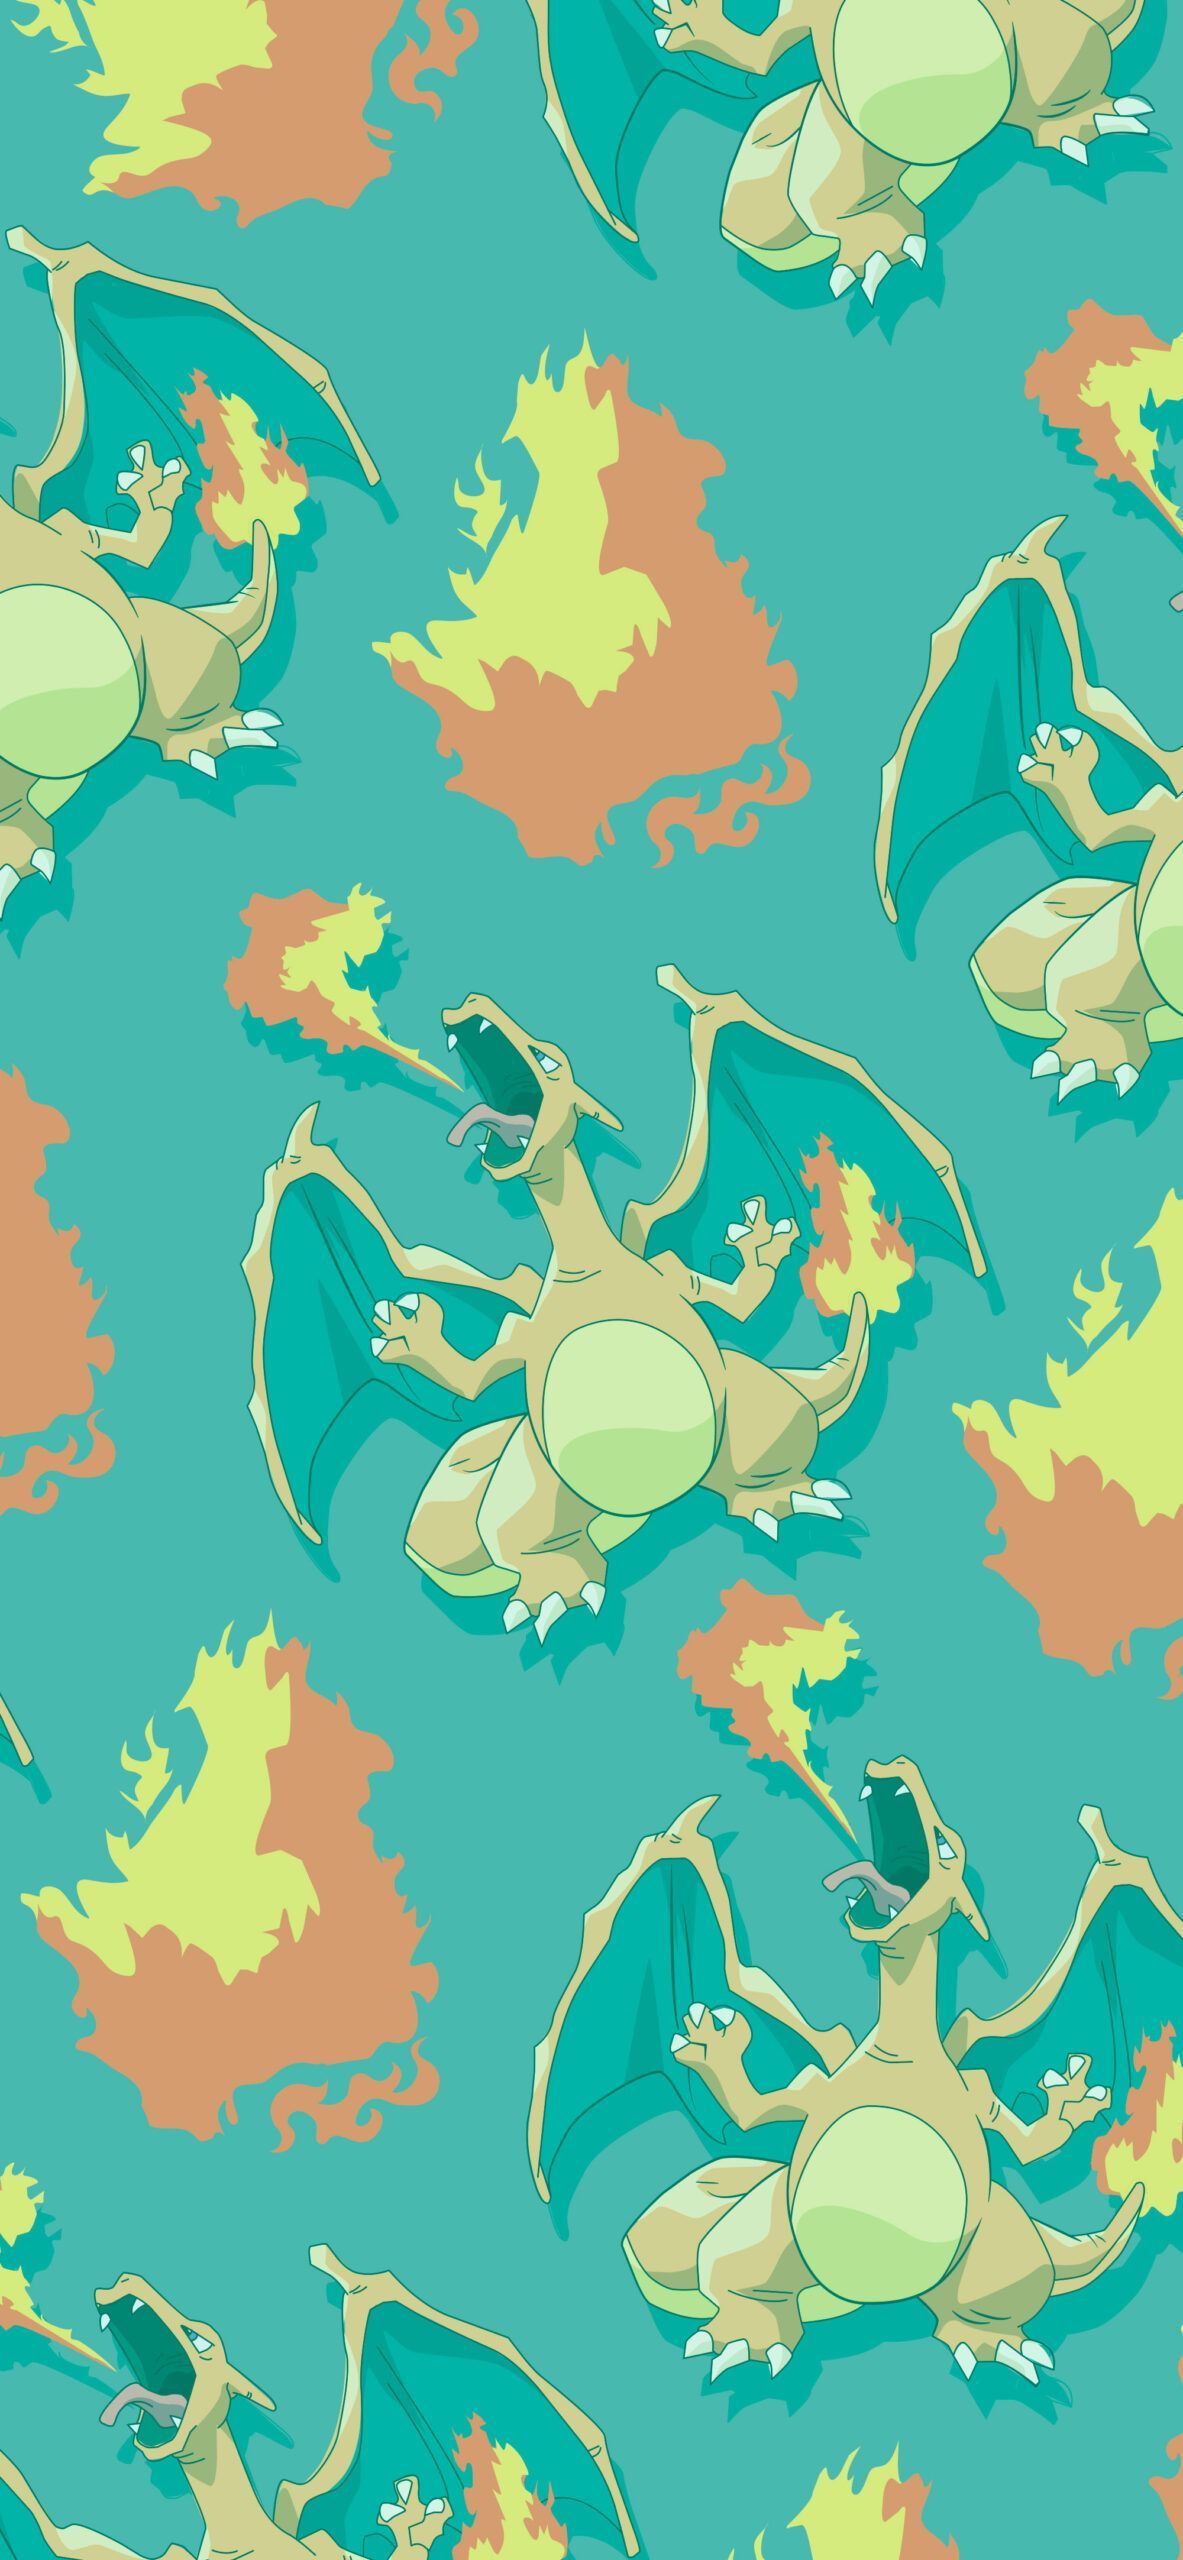 Pokemon wallpaper for mobile devices with Charizard - Pokemon